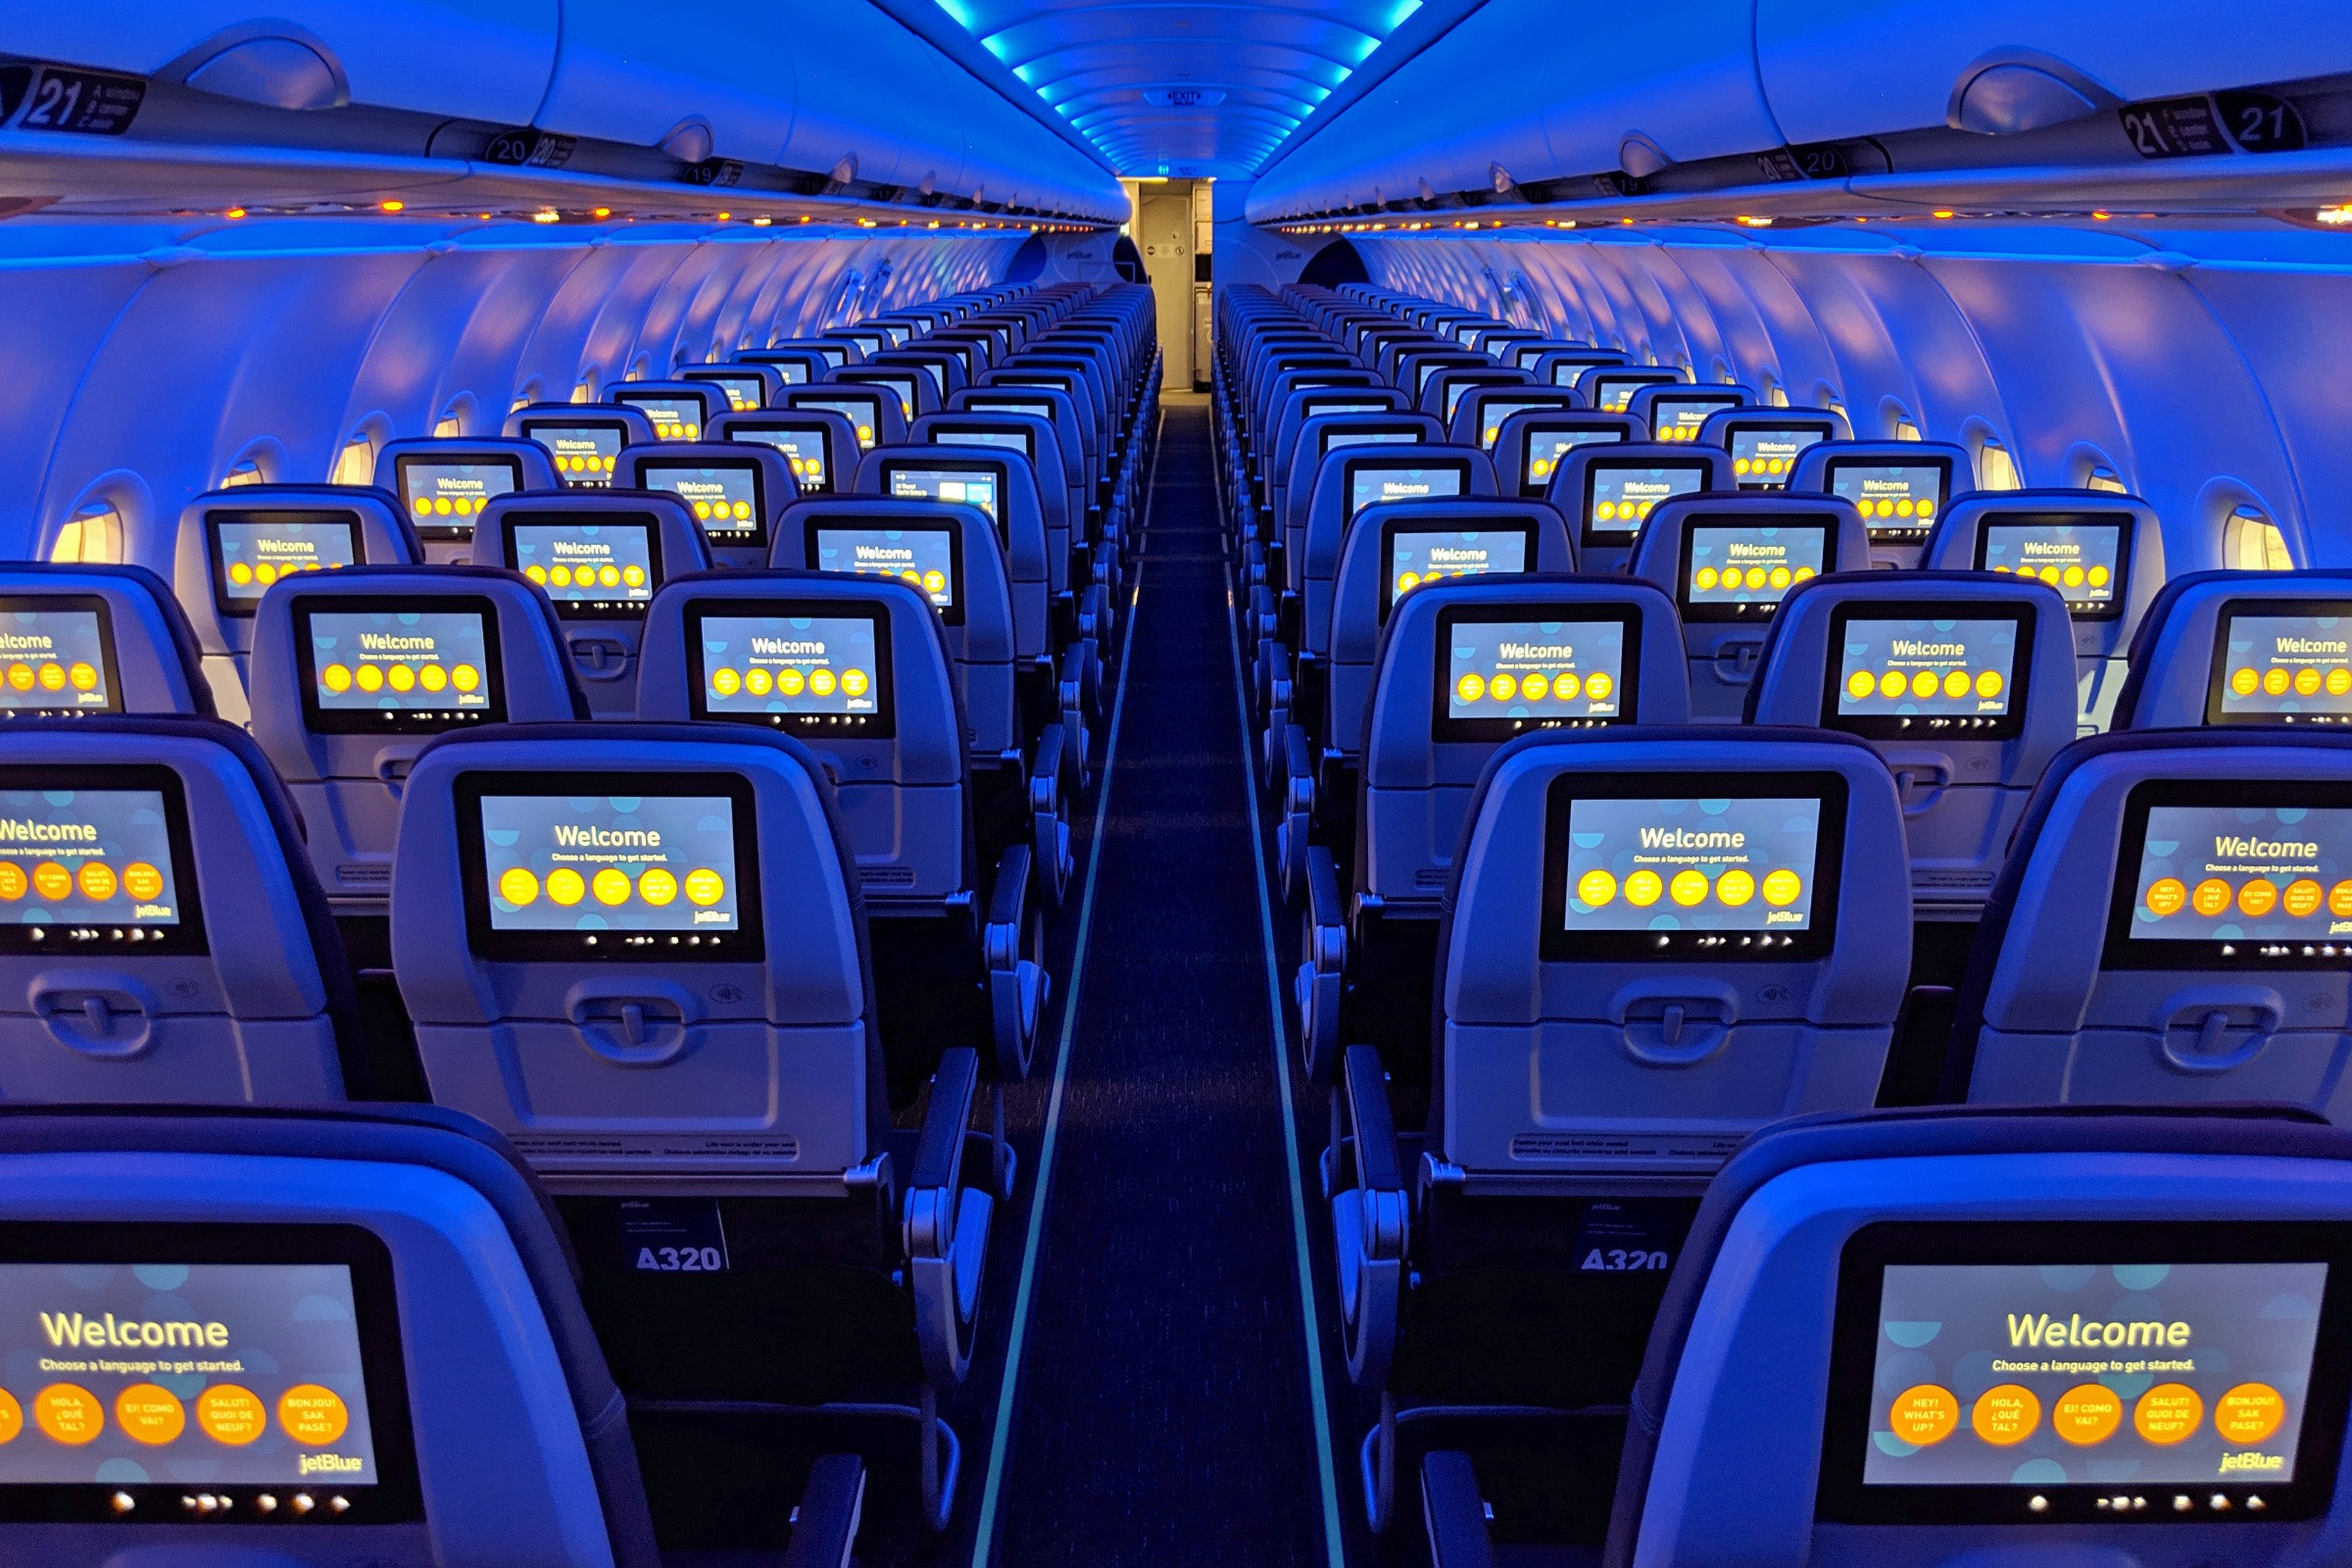 Inside JetBlue's First 'Phase 2' Retrofitted Airbus A320